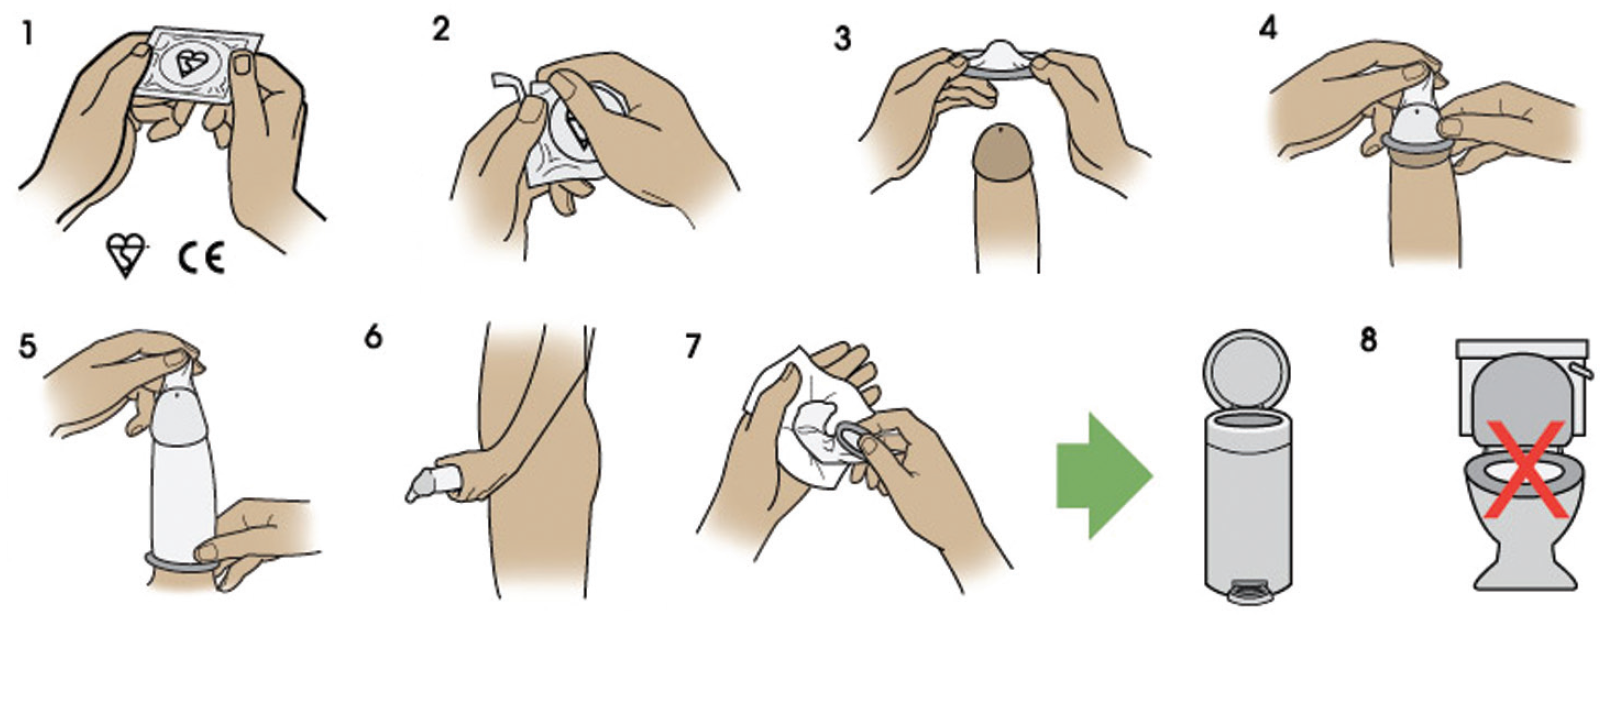 Visual guide to the 8 steps of putting a condom on, as documented above